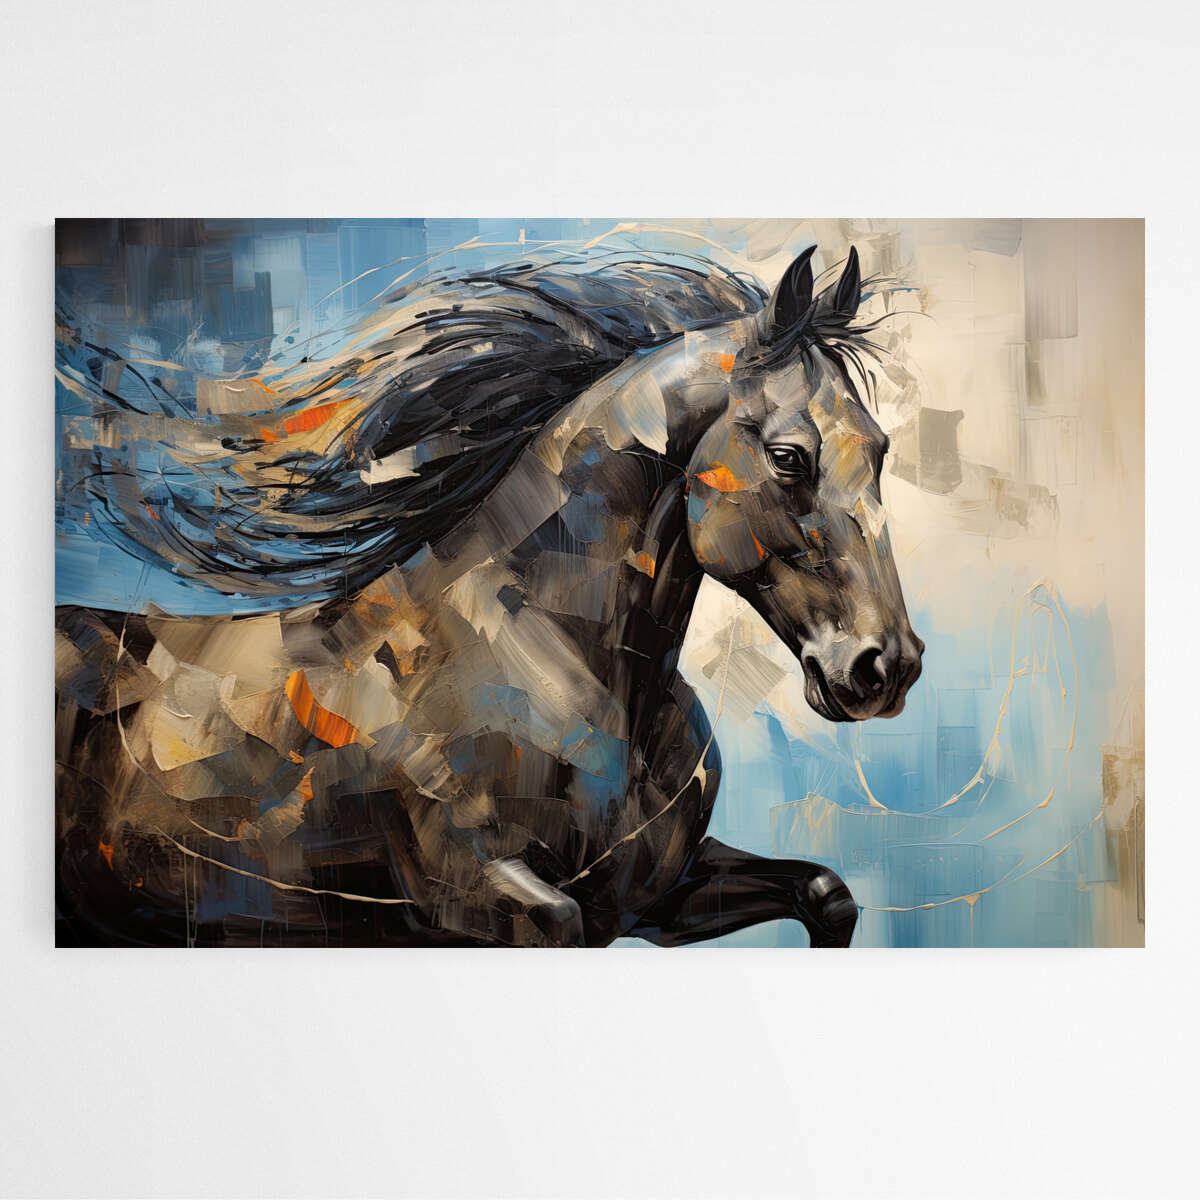 Animals　Canvas　in　The　Equestrian　Art　–　Wall　Horse　Prints　Motion　Hive